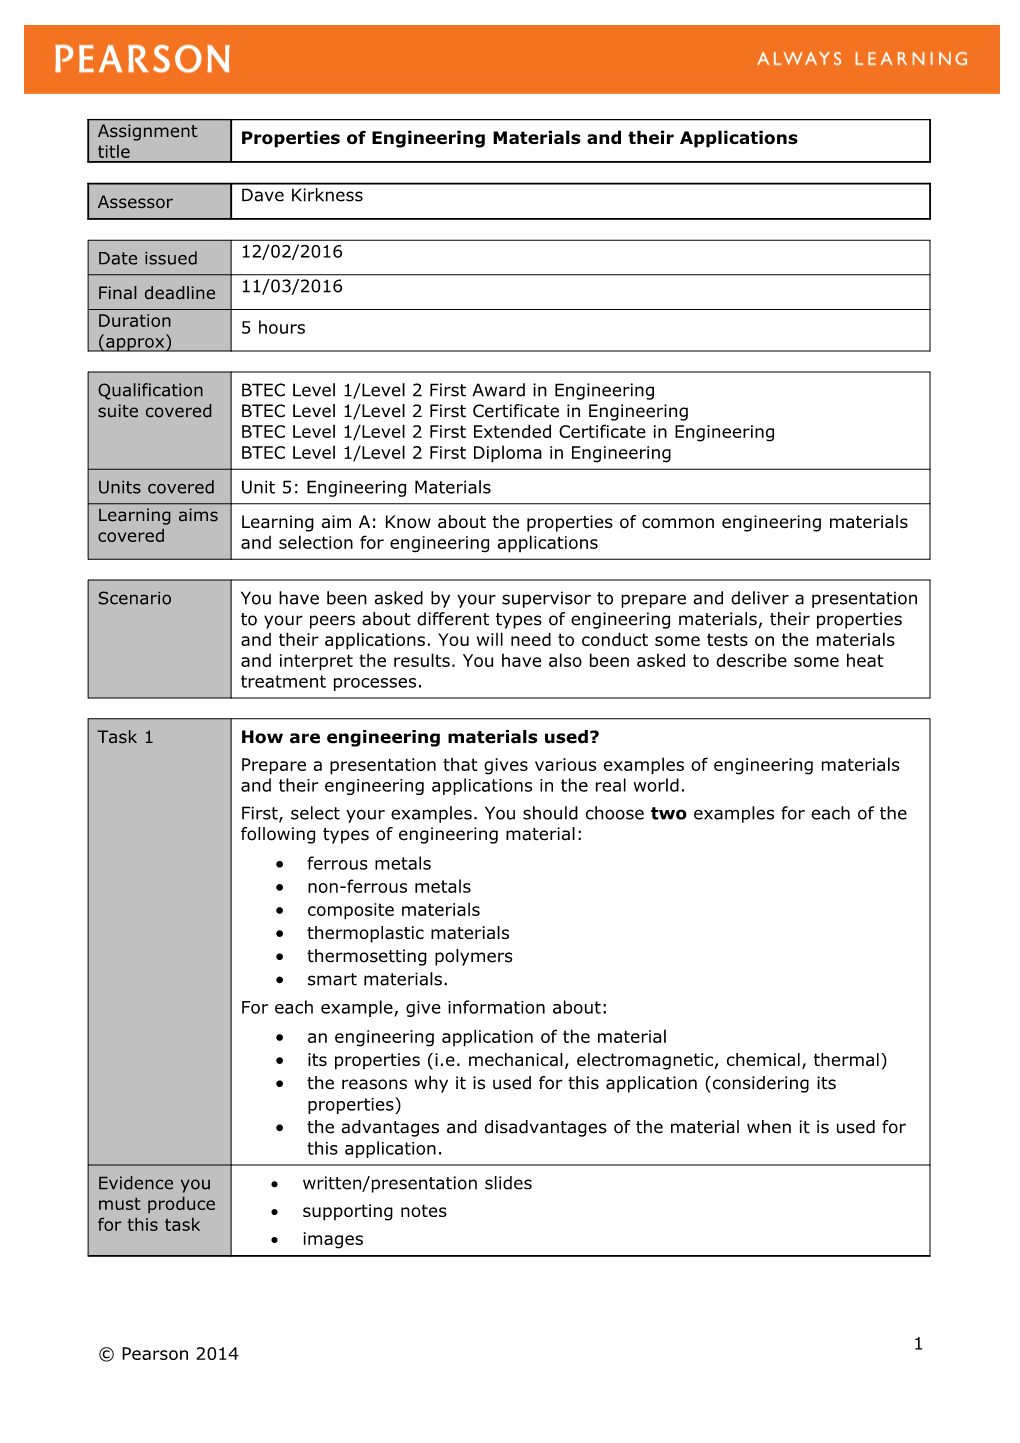 Unit 5: Engineering Materials - Authorised Assignment Brief for Learning Aim a (Version